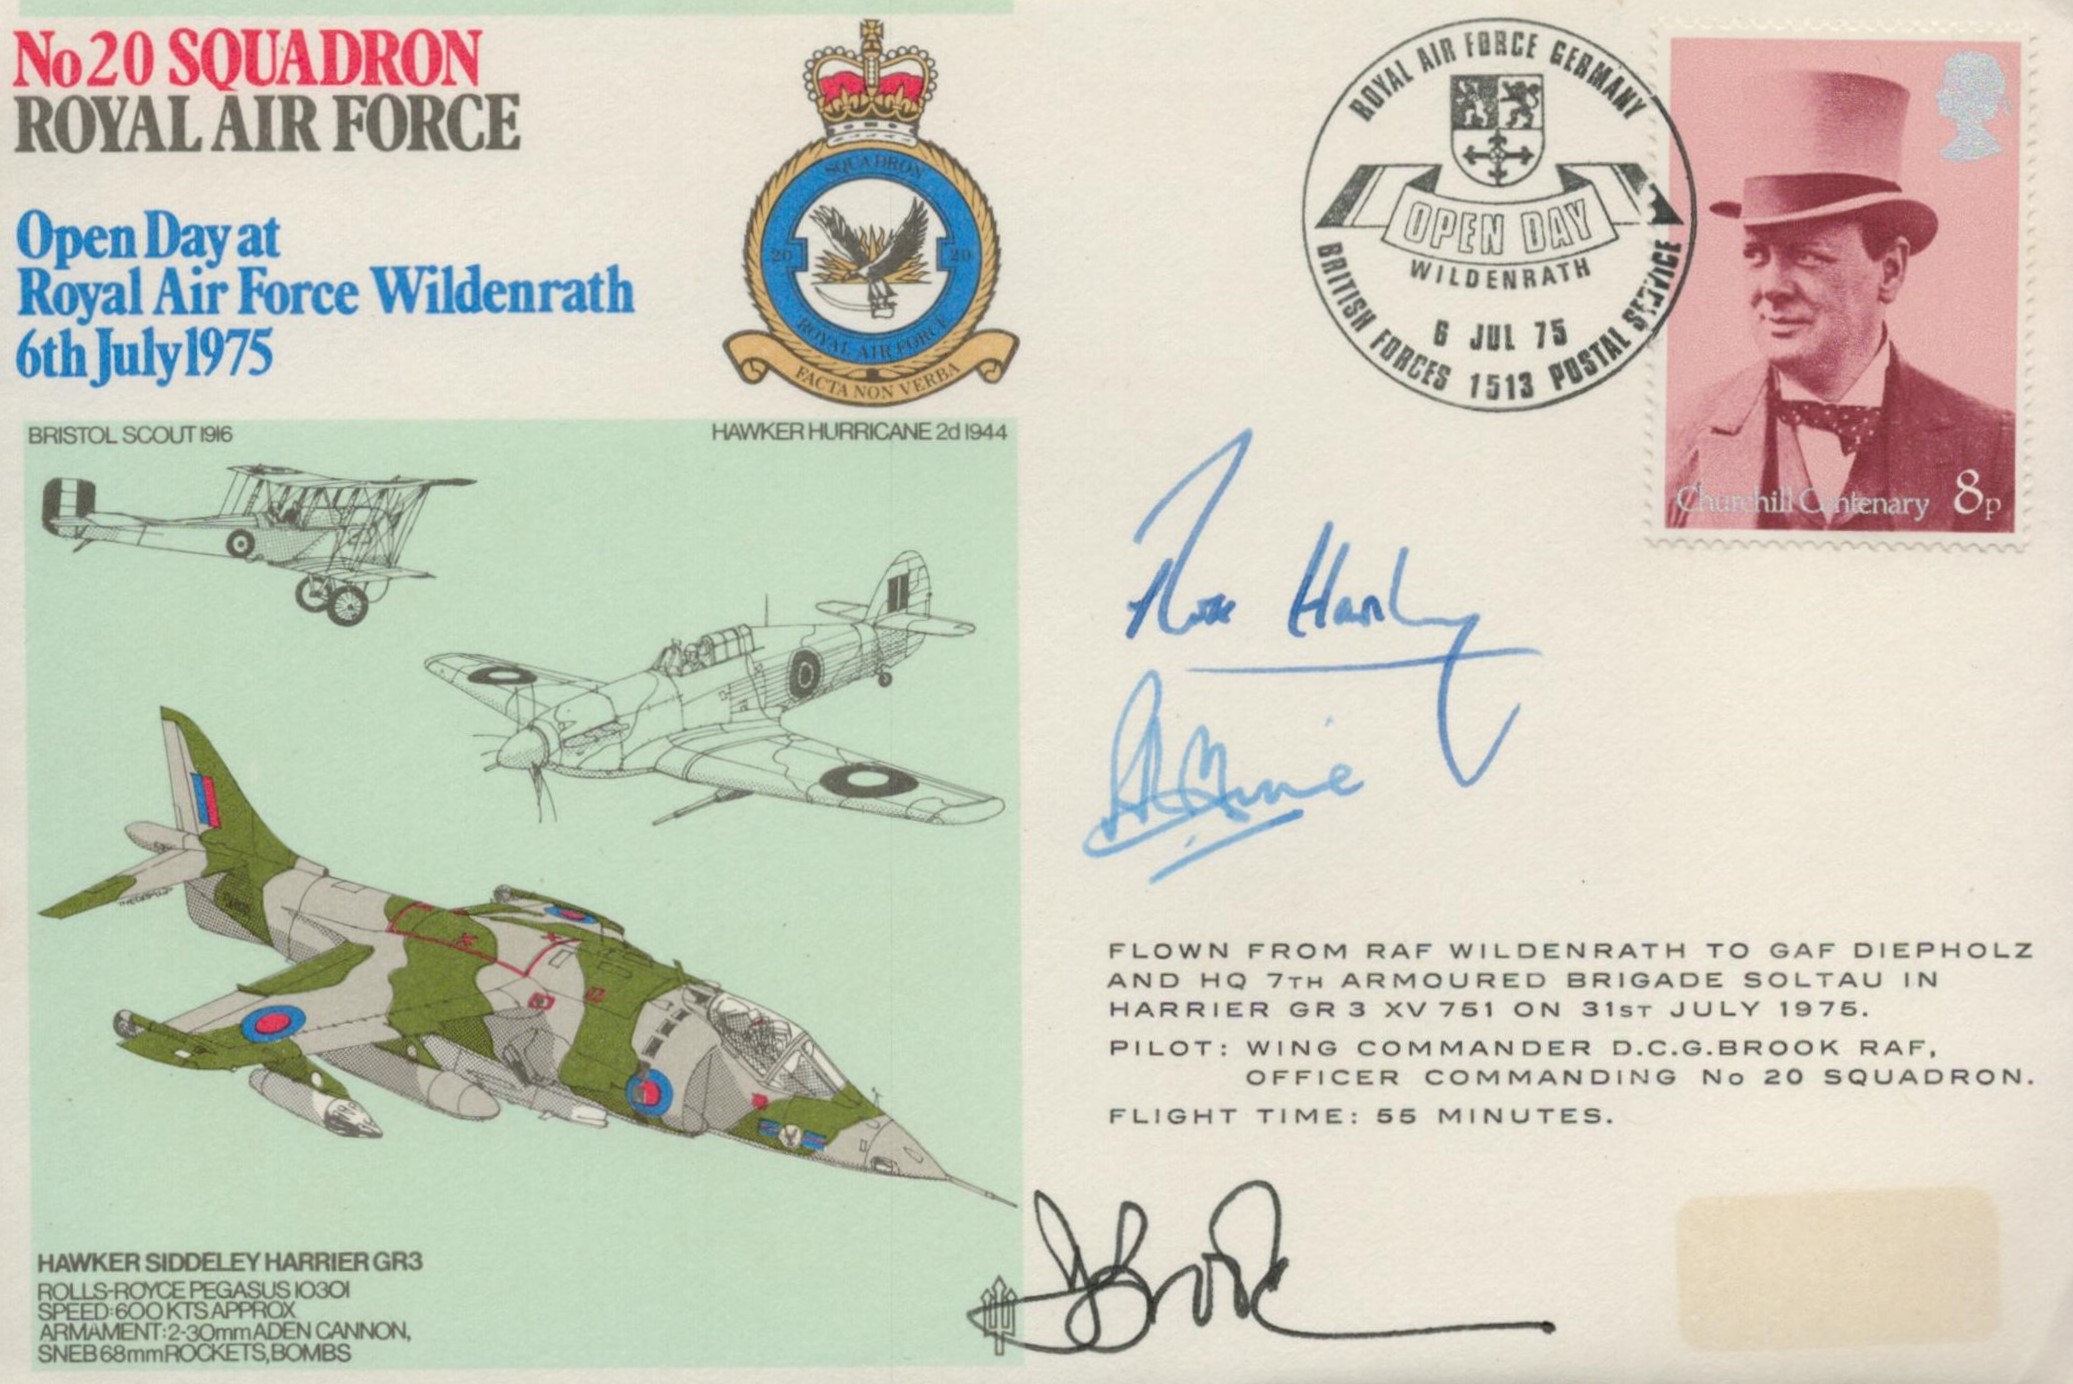 AVM R. P Harding, Air Commodore P. B Hine and Wg Cdr D. C. G Brook Signed No 20 Squadron, Open Day